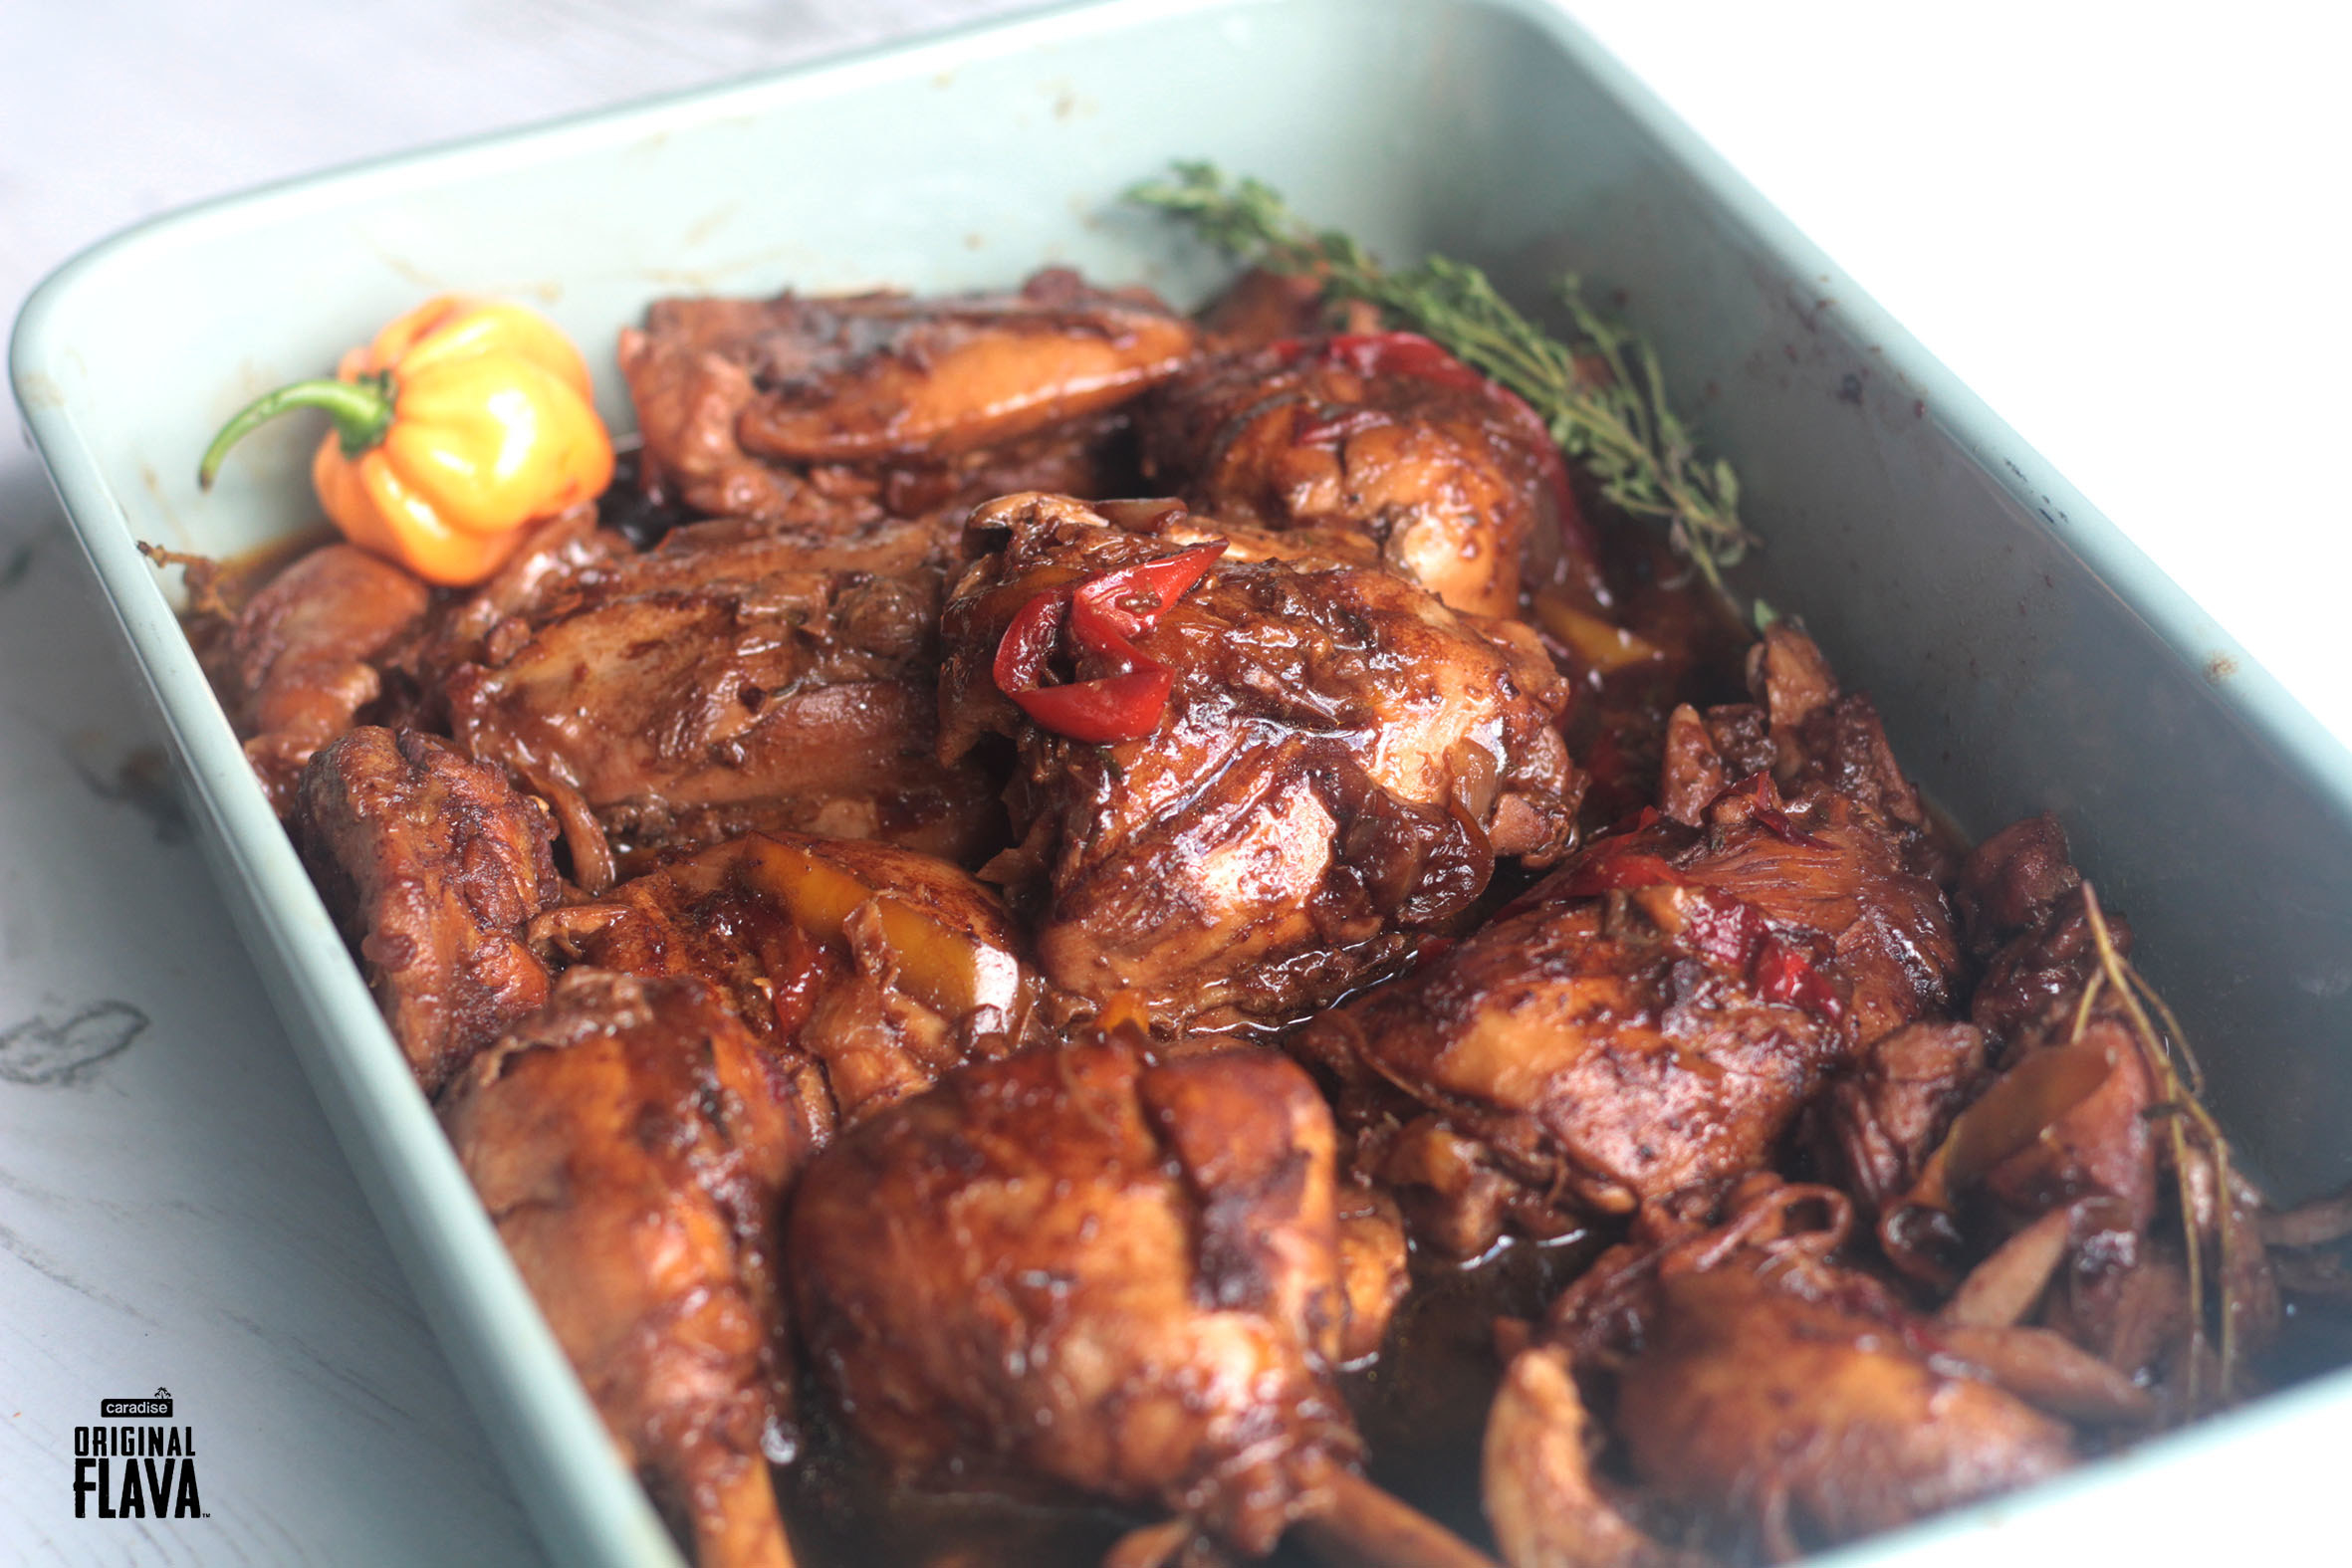 A baking dish of brown stewed chicken thighs and legs garnished with a small scotch bonnet pepper and sprigs of thyme.